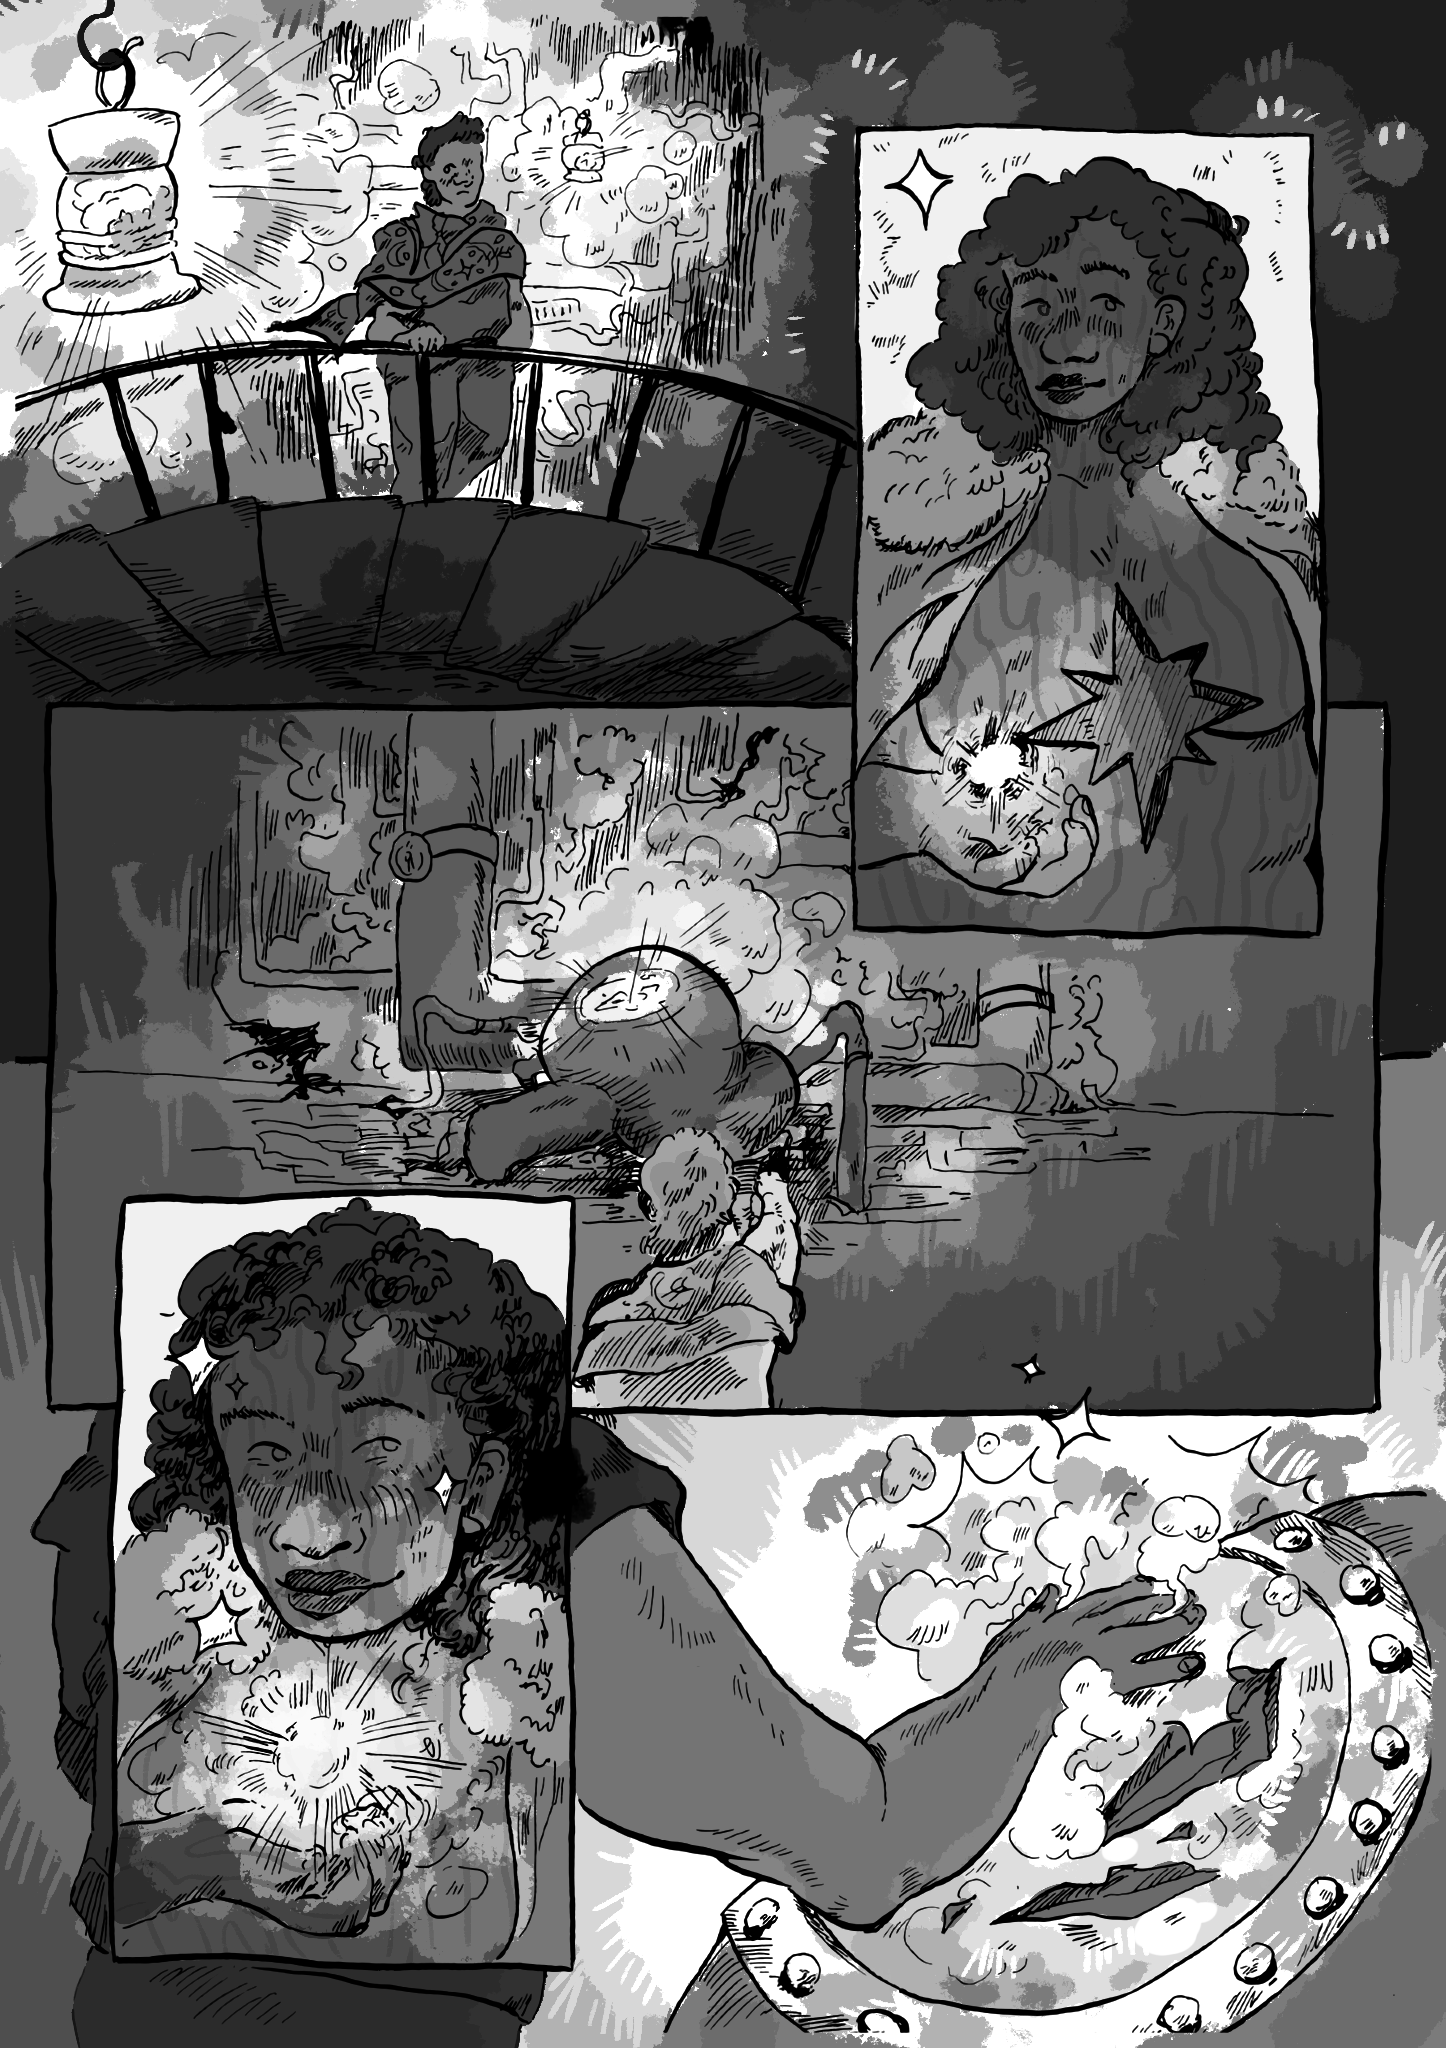 A black and white comic page of Safiyyah venturing into the mechanical underbelly of a ship, while seeing visions of a woman carved out of wood holding a light. She puts her hand on the mechanical heart of the ship.